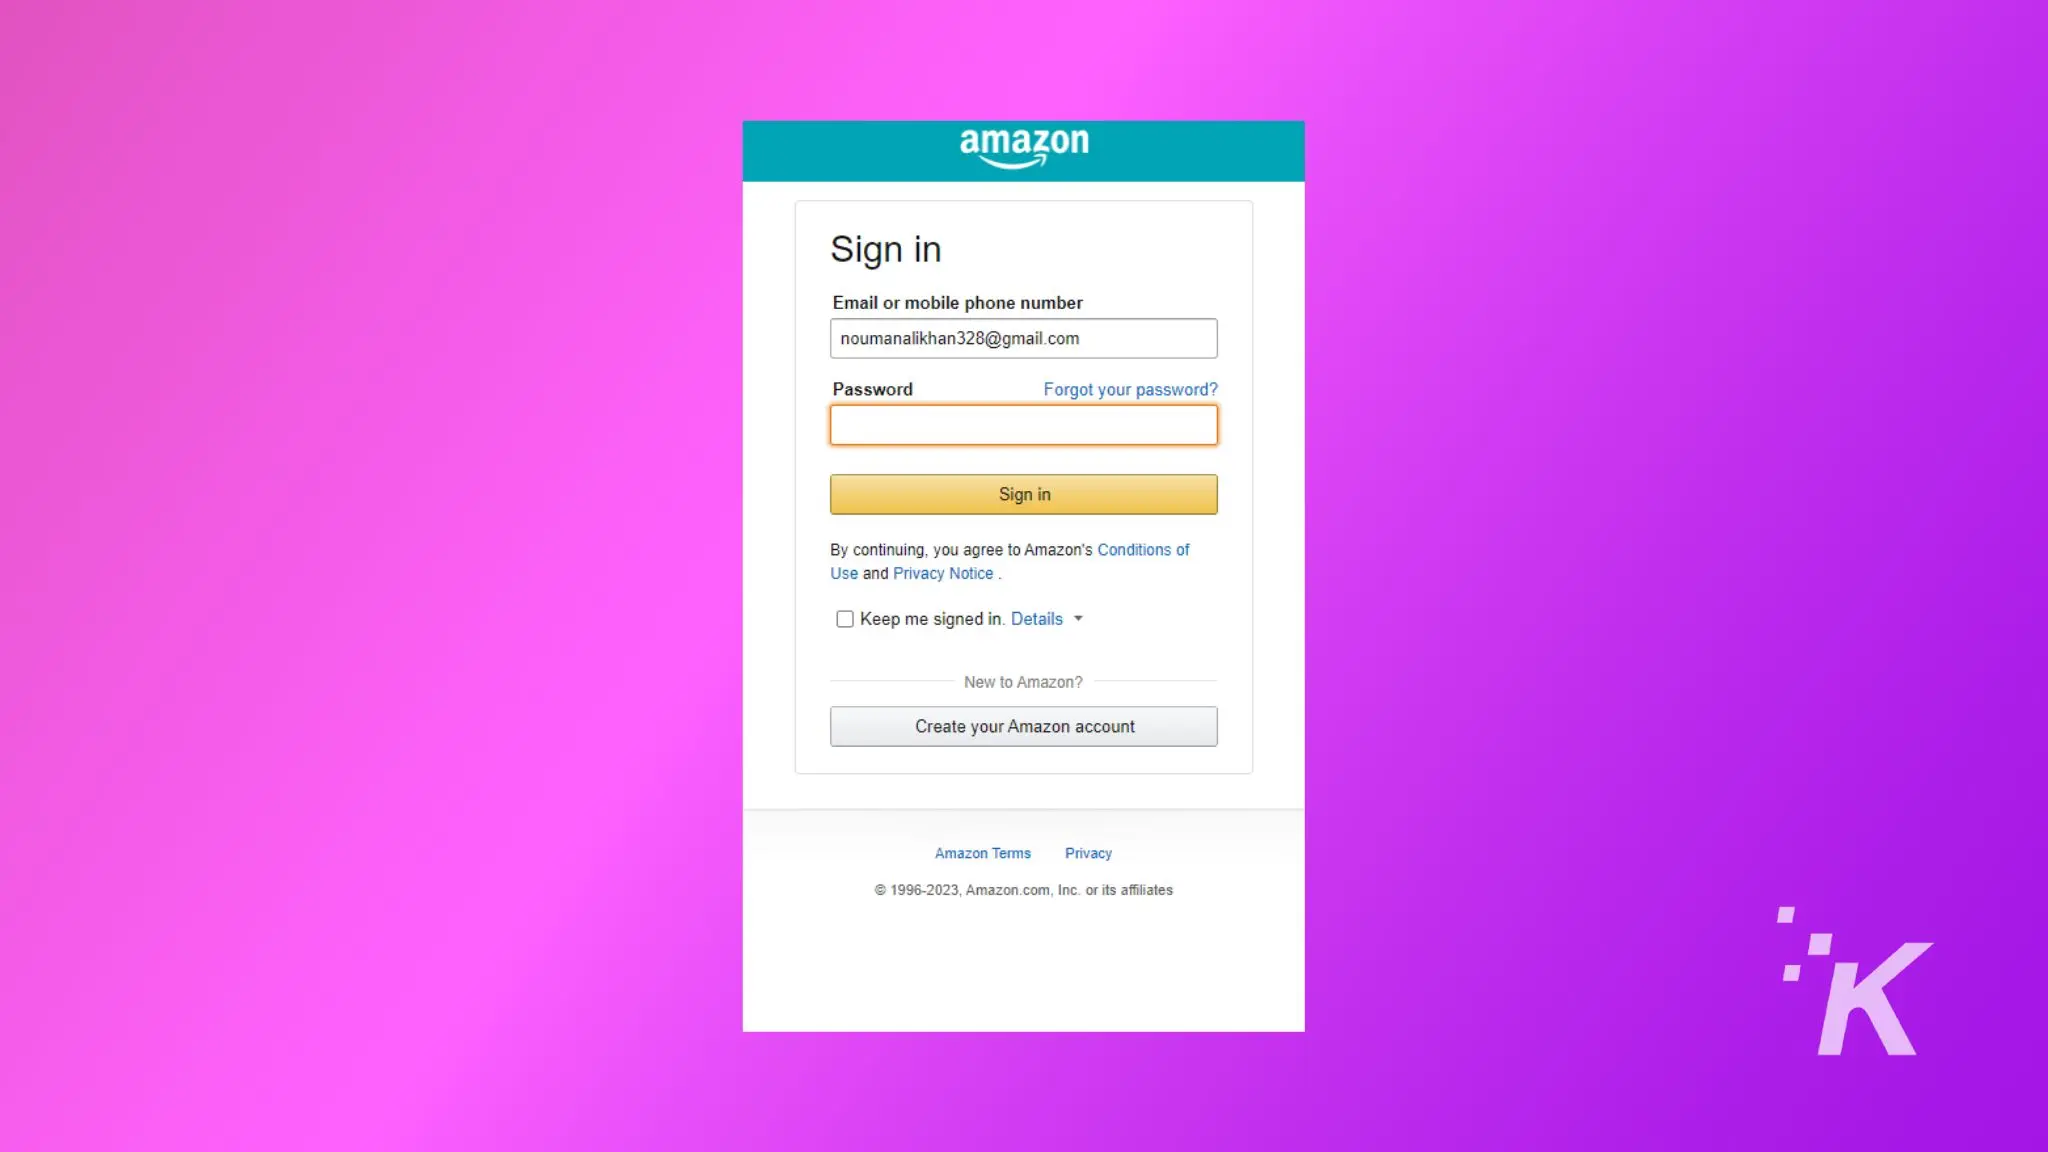 The image shows the login page for Amazon, prompting the user to enter their email address and password to sign in.